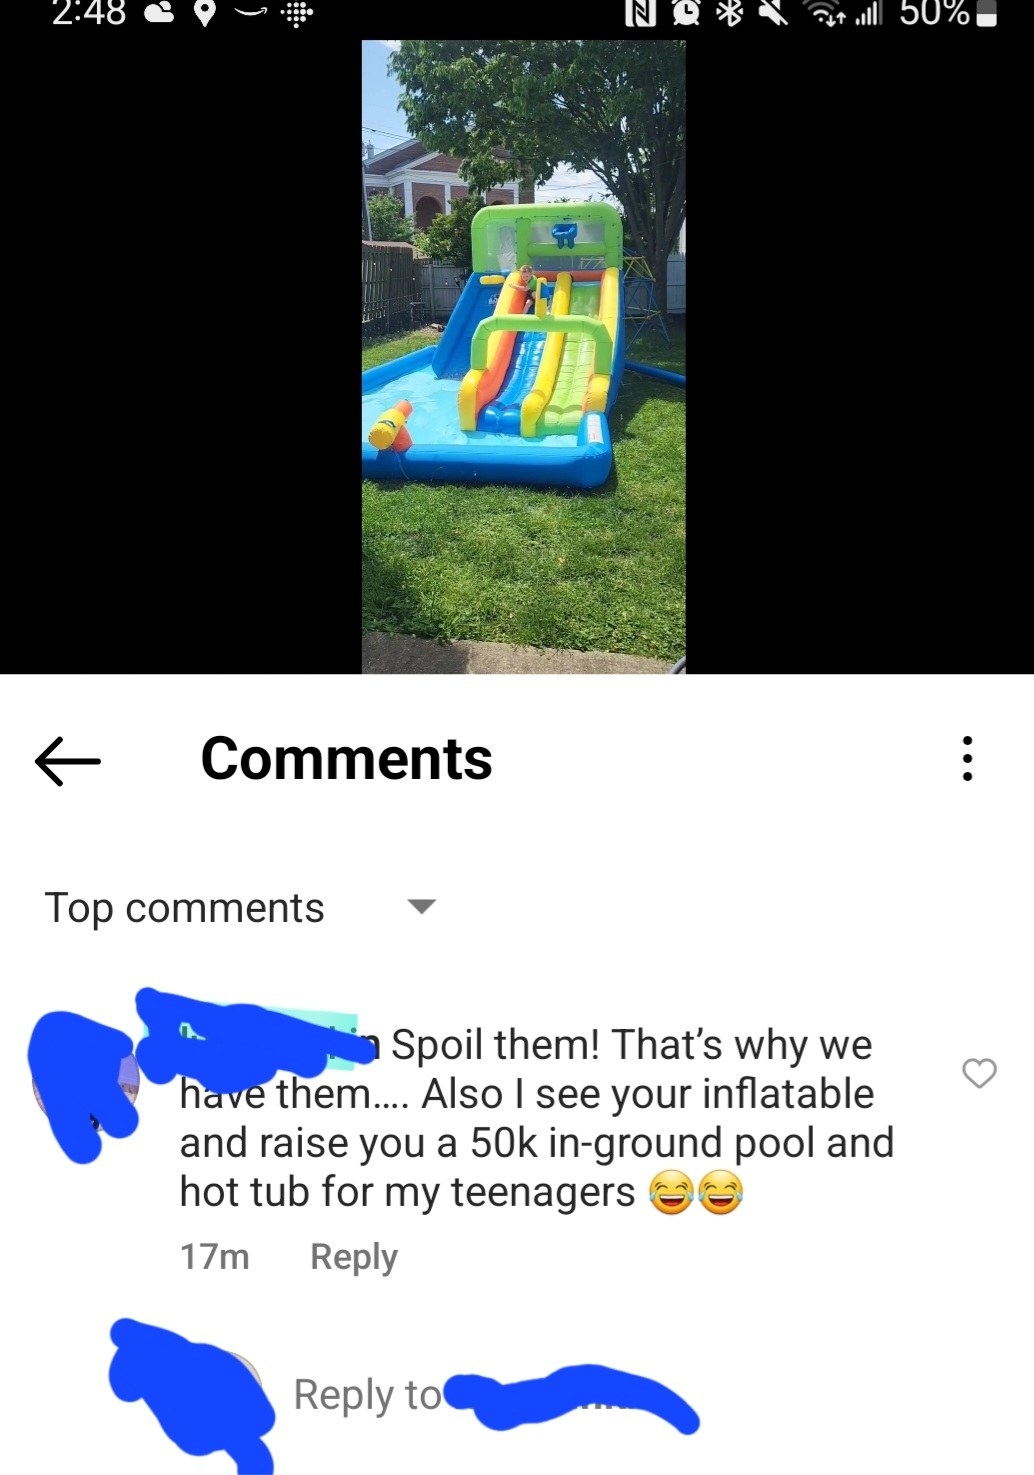 On a video of kids playing on an inflatable slide, the ex says &quot;I see your inflatable and raise you a 50,000 in-ground pool and hot tub for my teenagers&quot; with laughing emojis